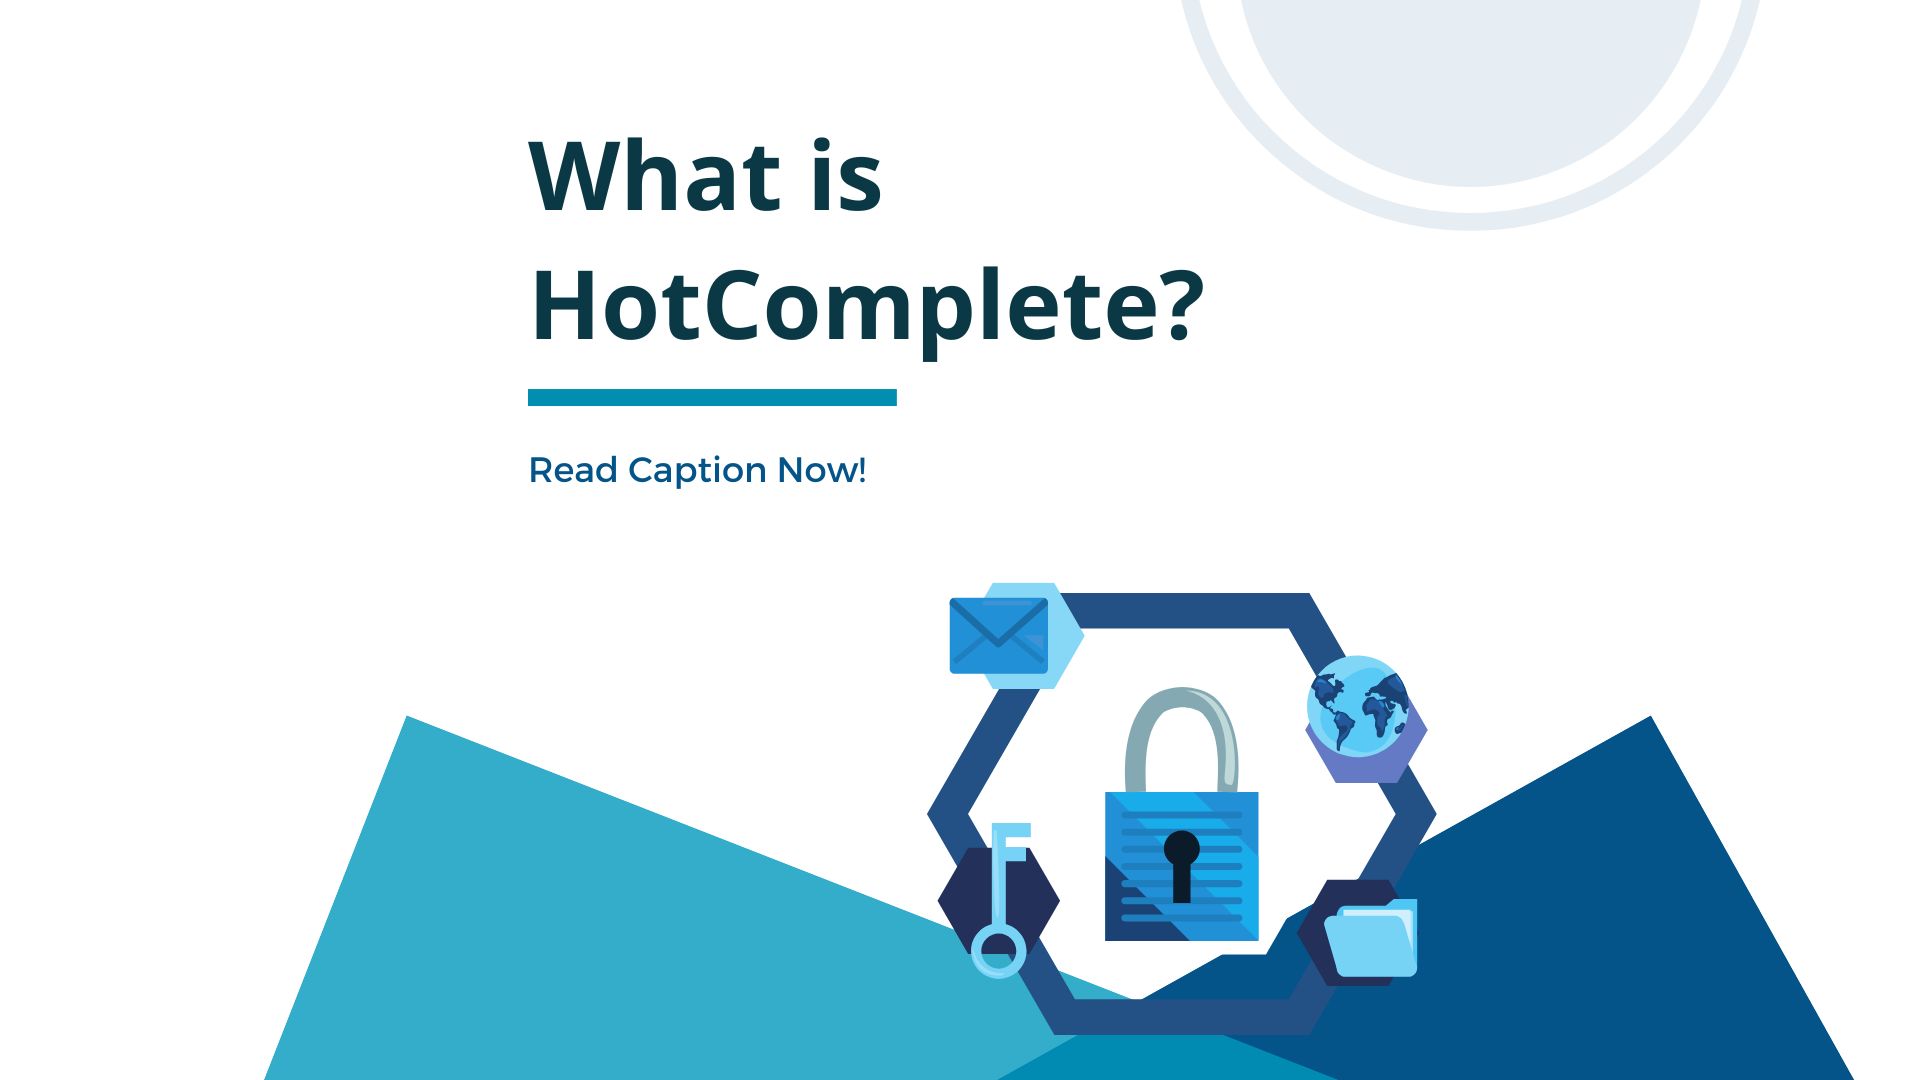 HotComplete Removal – How to Remove HotComplete Virus From Your PC